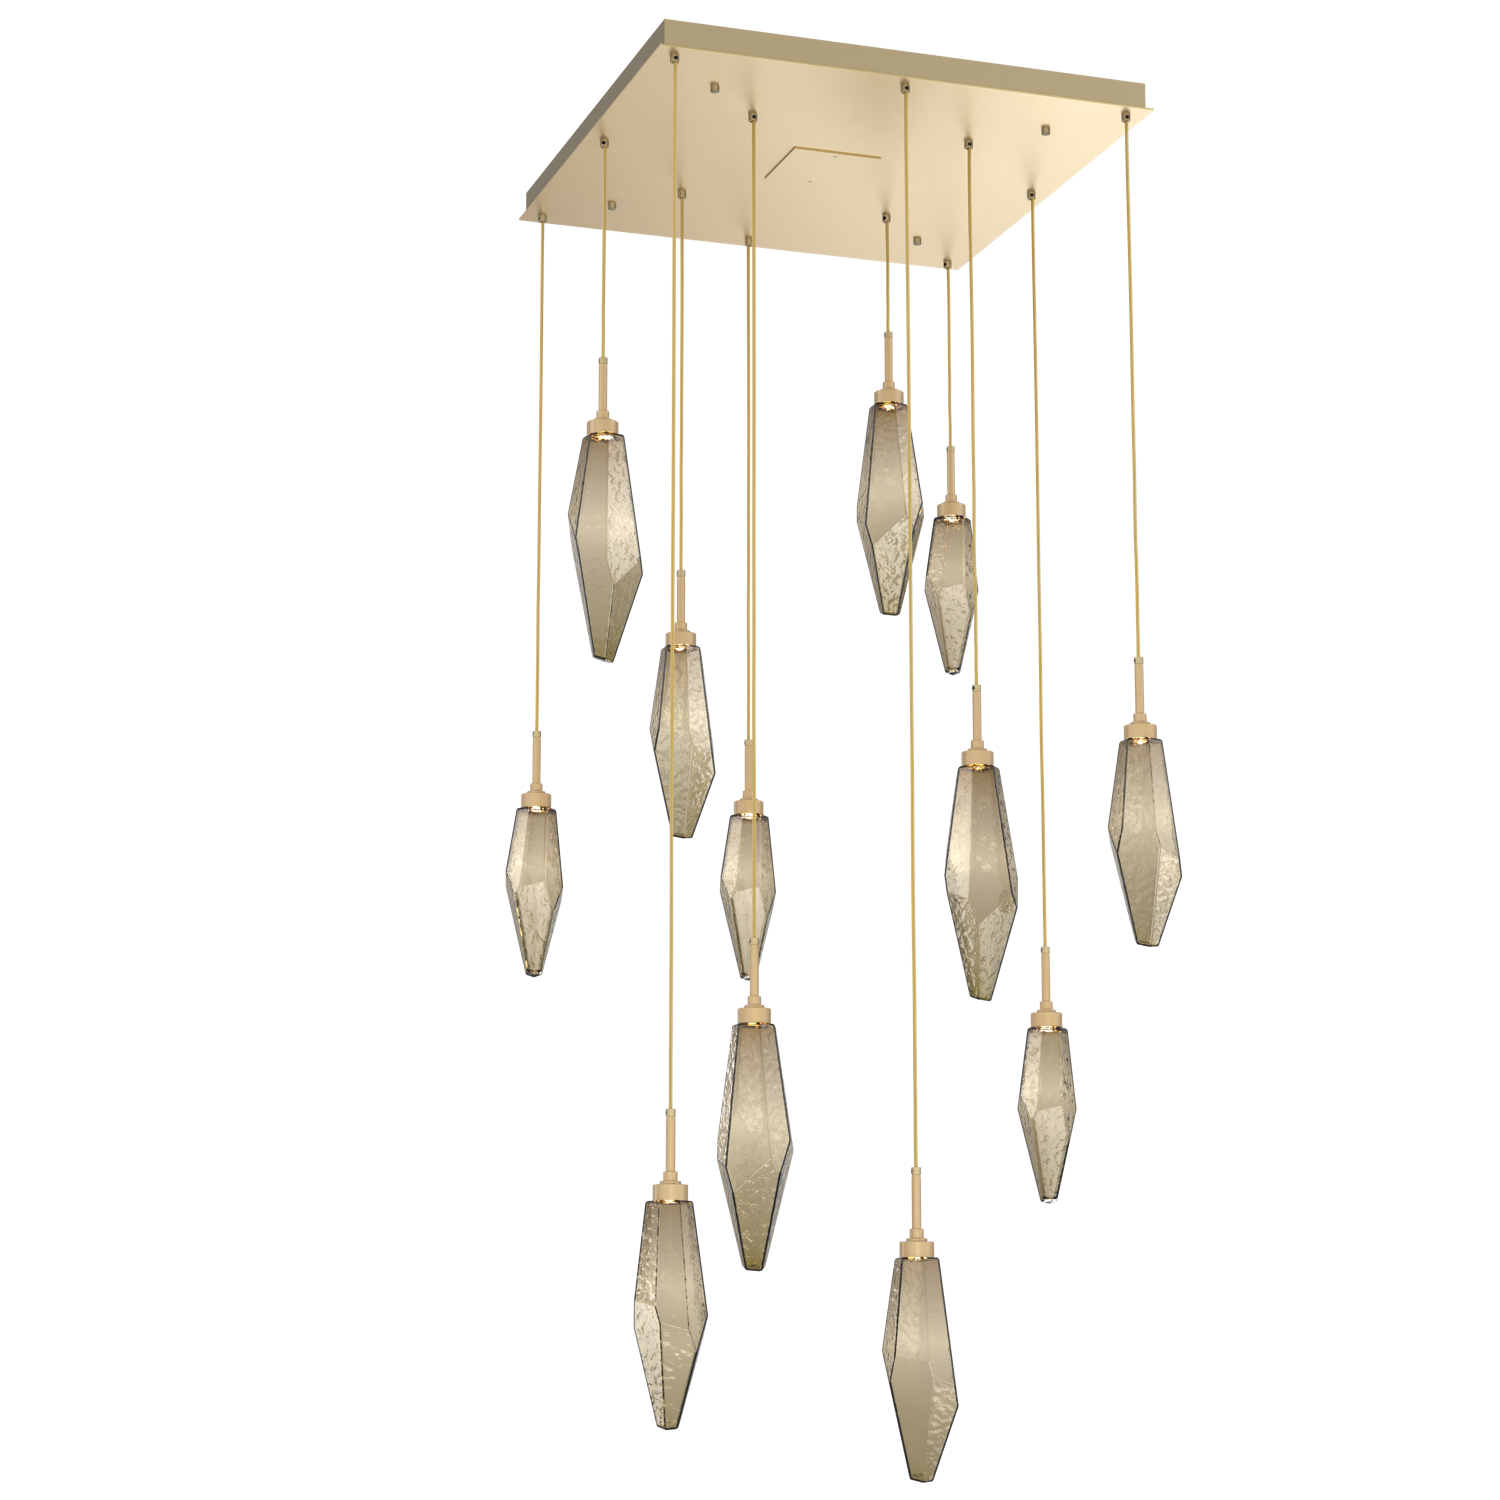 CHB0050-12-GB-CB-Hammerton-Studio-Rock-Crystal-12-light-square-pendant-chandelier-with-gilded-brass-finish-and-chilled-bronze-blown-glass-shades-and-LED-lamping